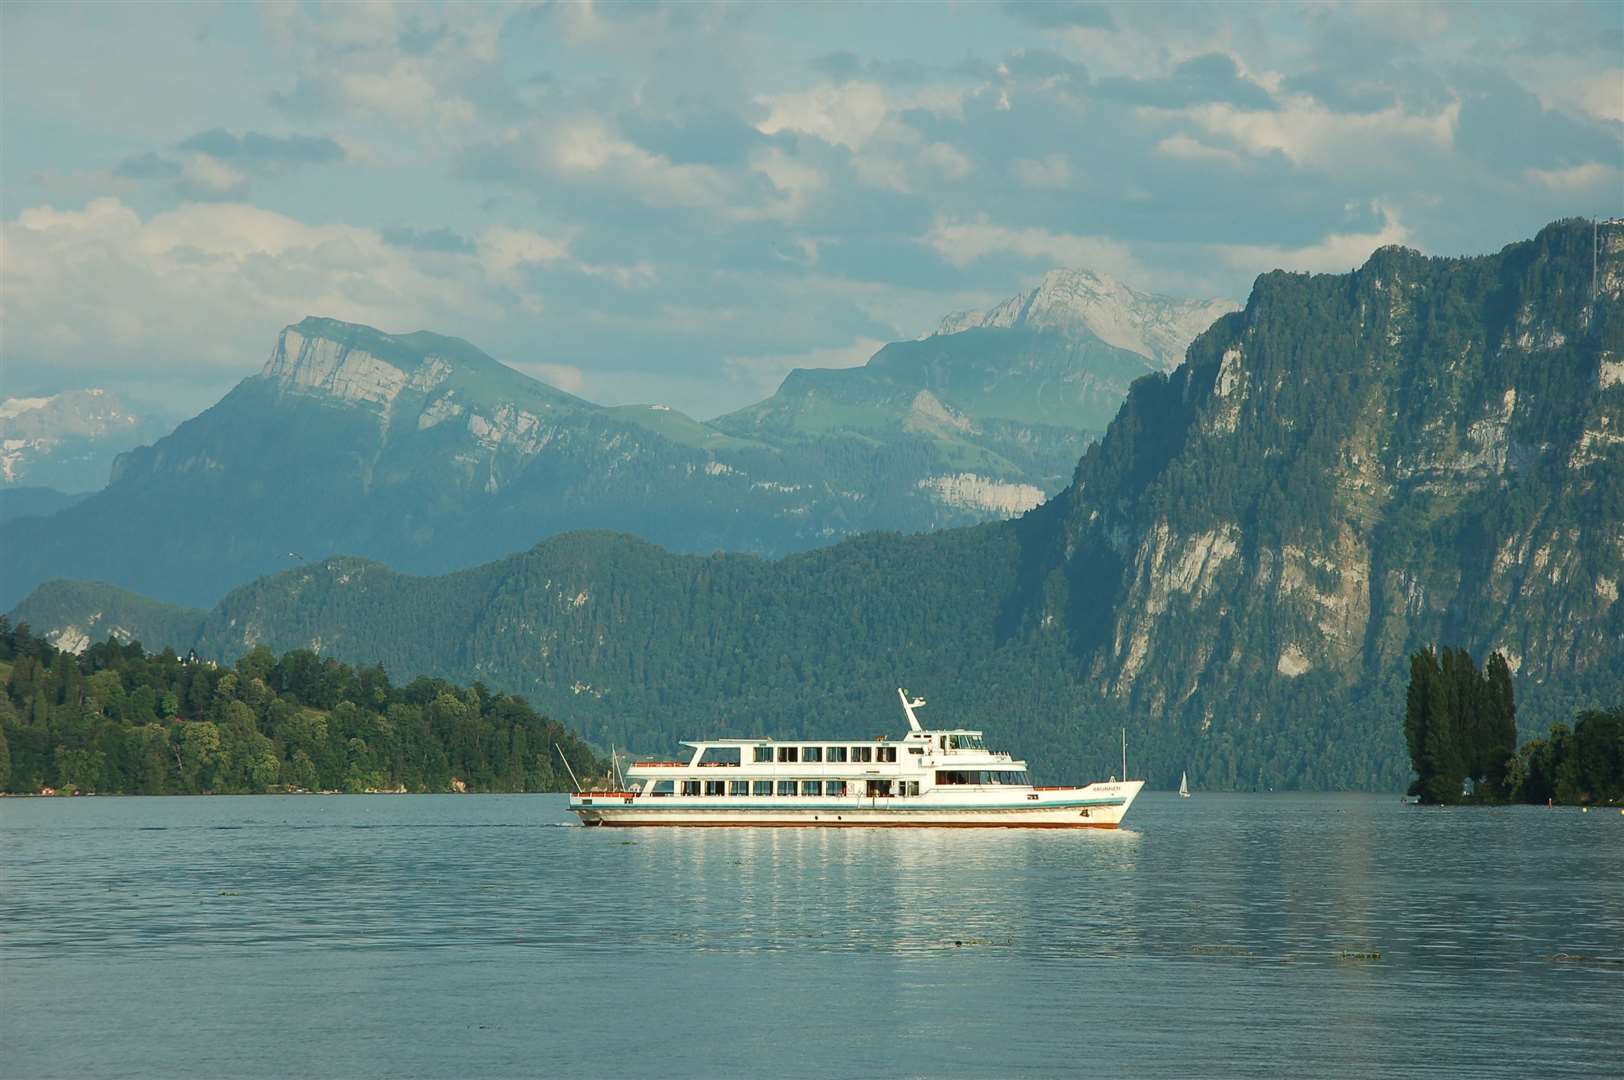 The majestic scenery and clear blue waters of the lake reflect on the MV Brunnen as it comes back to Luzern from a trip down the lake.